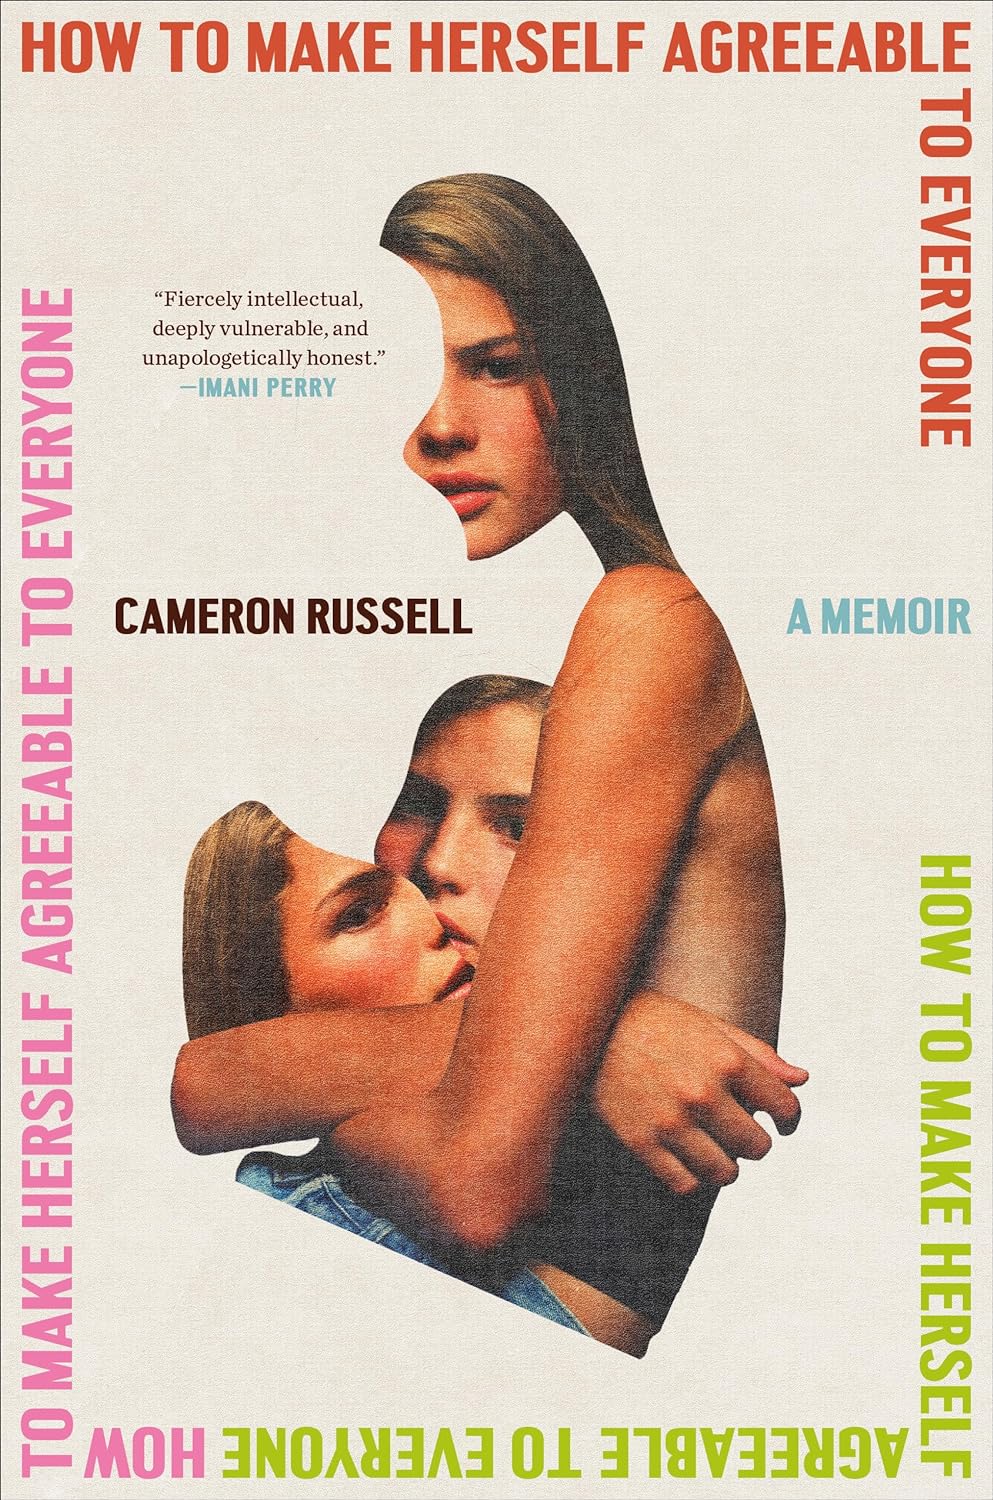 Cameron Russell, <em><a class="external" href="https://bookshop.org/a/132/9780593595480" target="_blank" rel="noopener">How to Make Herself Agreeable to Everyone: A Memoir</a></em>; cover design by Arsh Raziuddin, art direction by Rachel Ake (Random House, March 19) 